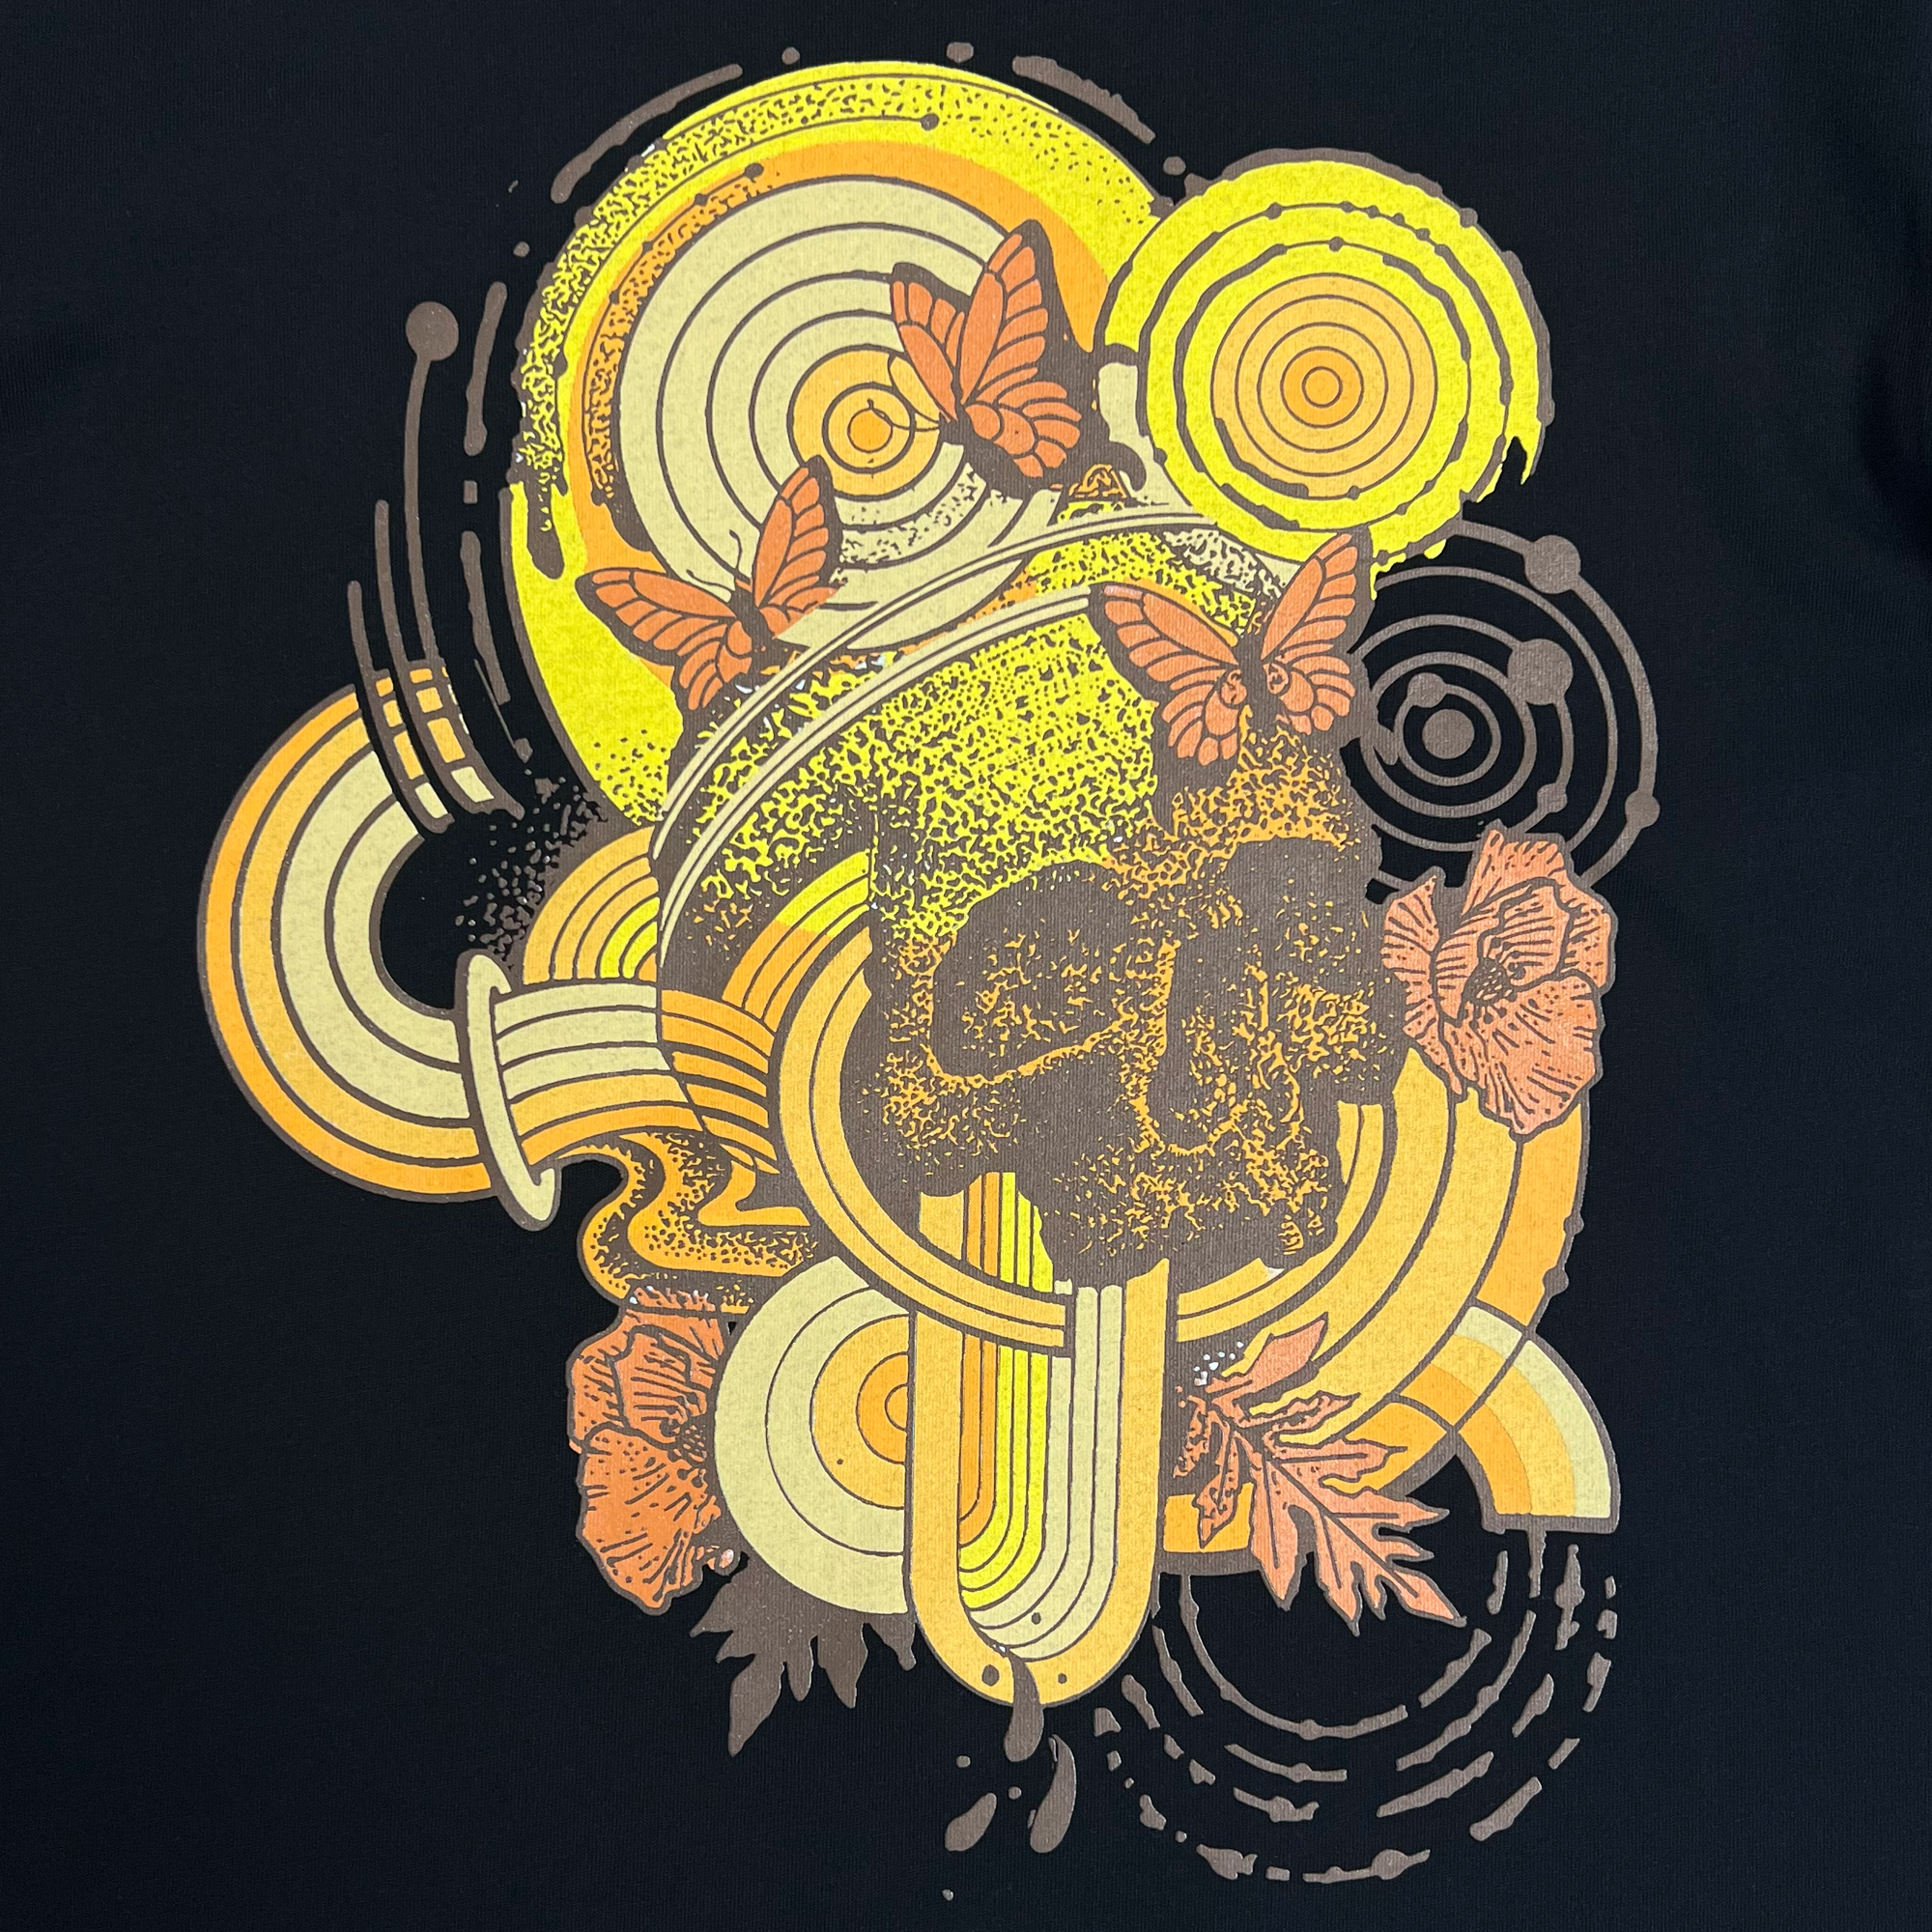 Close-up of swirl design symbolizing rebirth featuring butterflies with a skull at the center on a black cotton t-shirt.